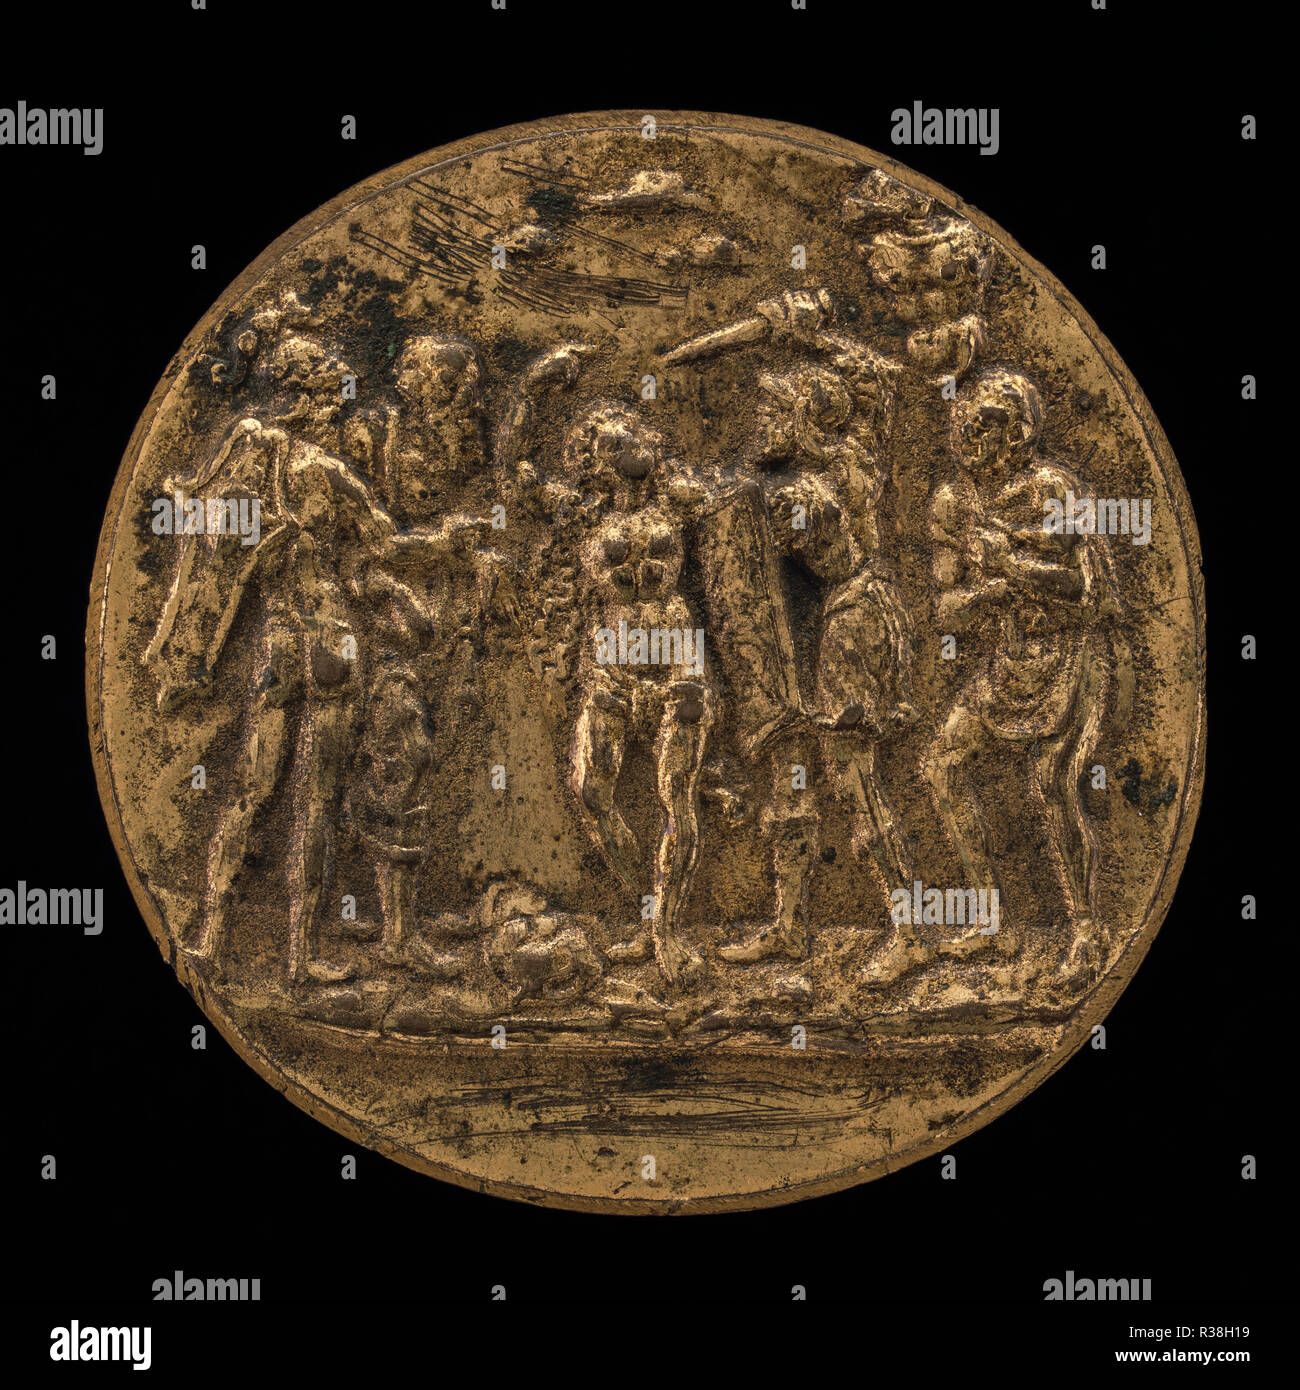 The Sacrifice of Iphigenia. Dated: second half 15th century. Dimensions: overall (diameter): 5.2 cm (2 1/16 in.) gross weight: 43 gr. Medium: gilded bronze. Museum: National Gallery of Art, Washington DC. Author: Master IO. F. F. Stock Photo